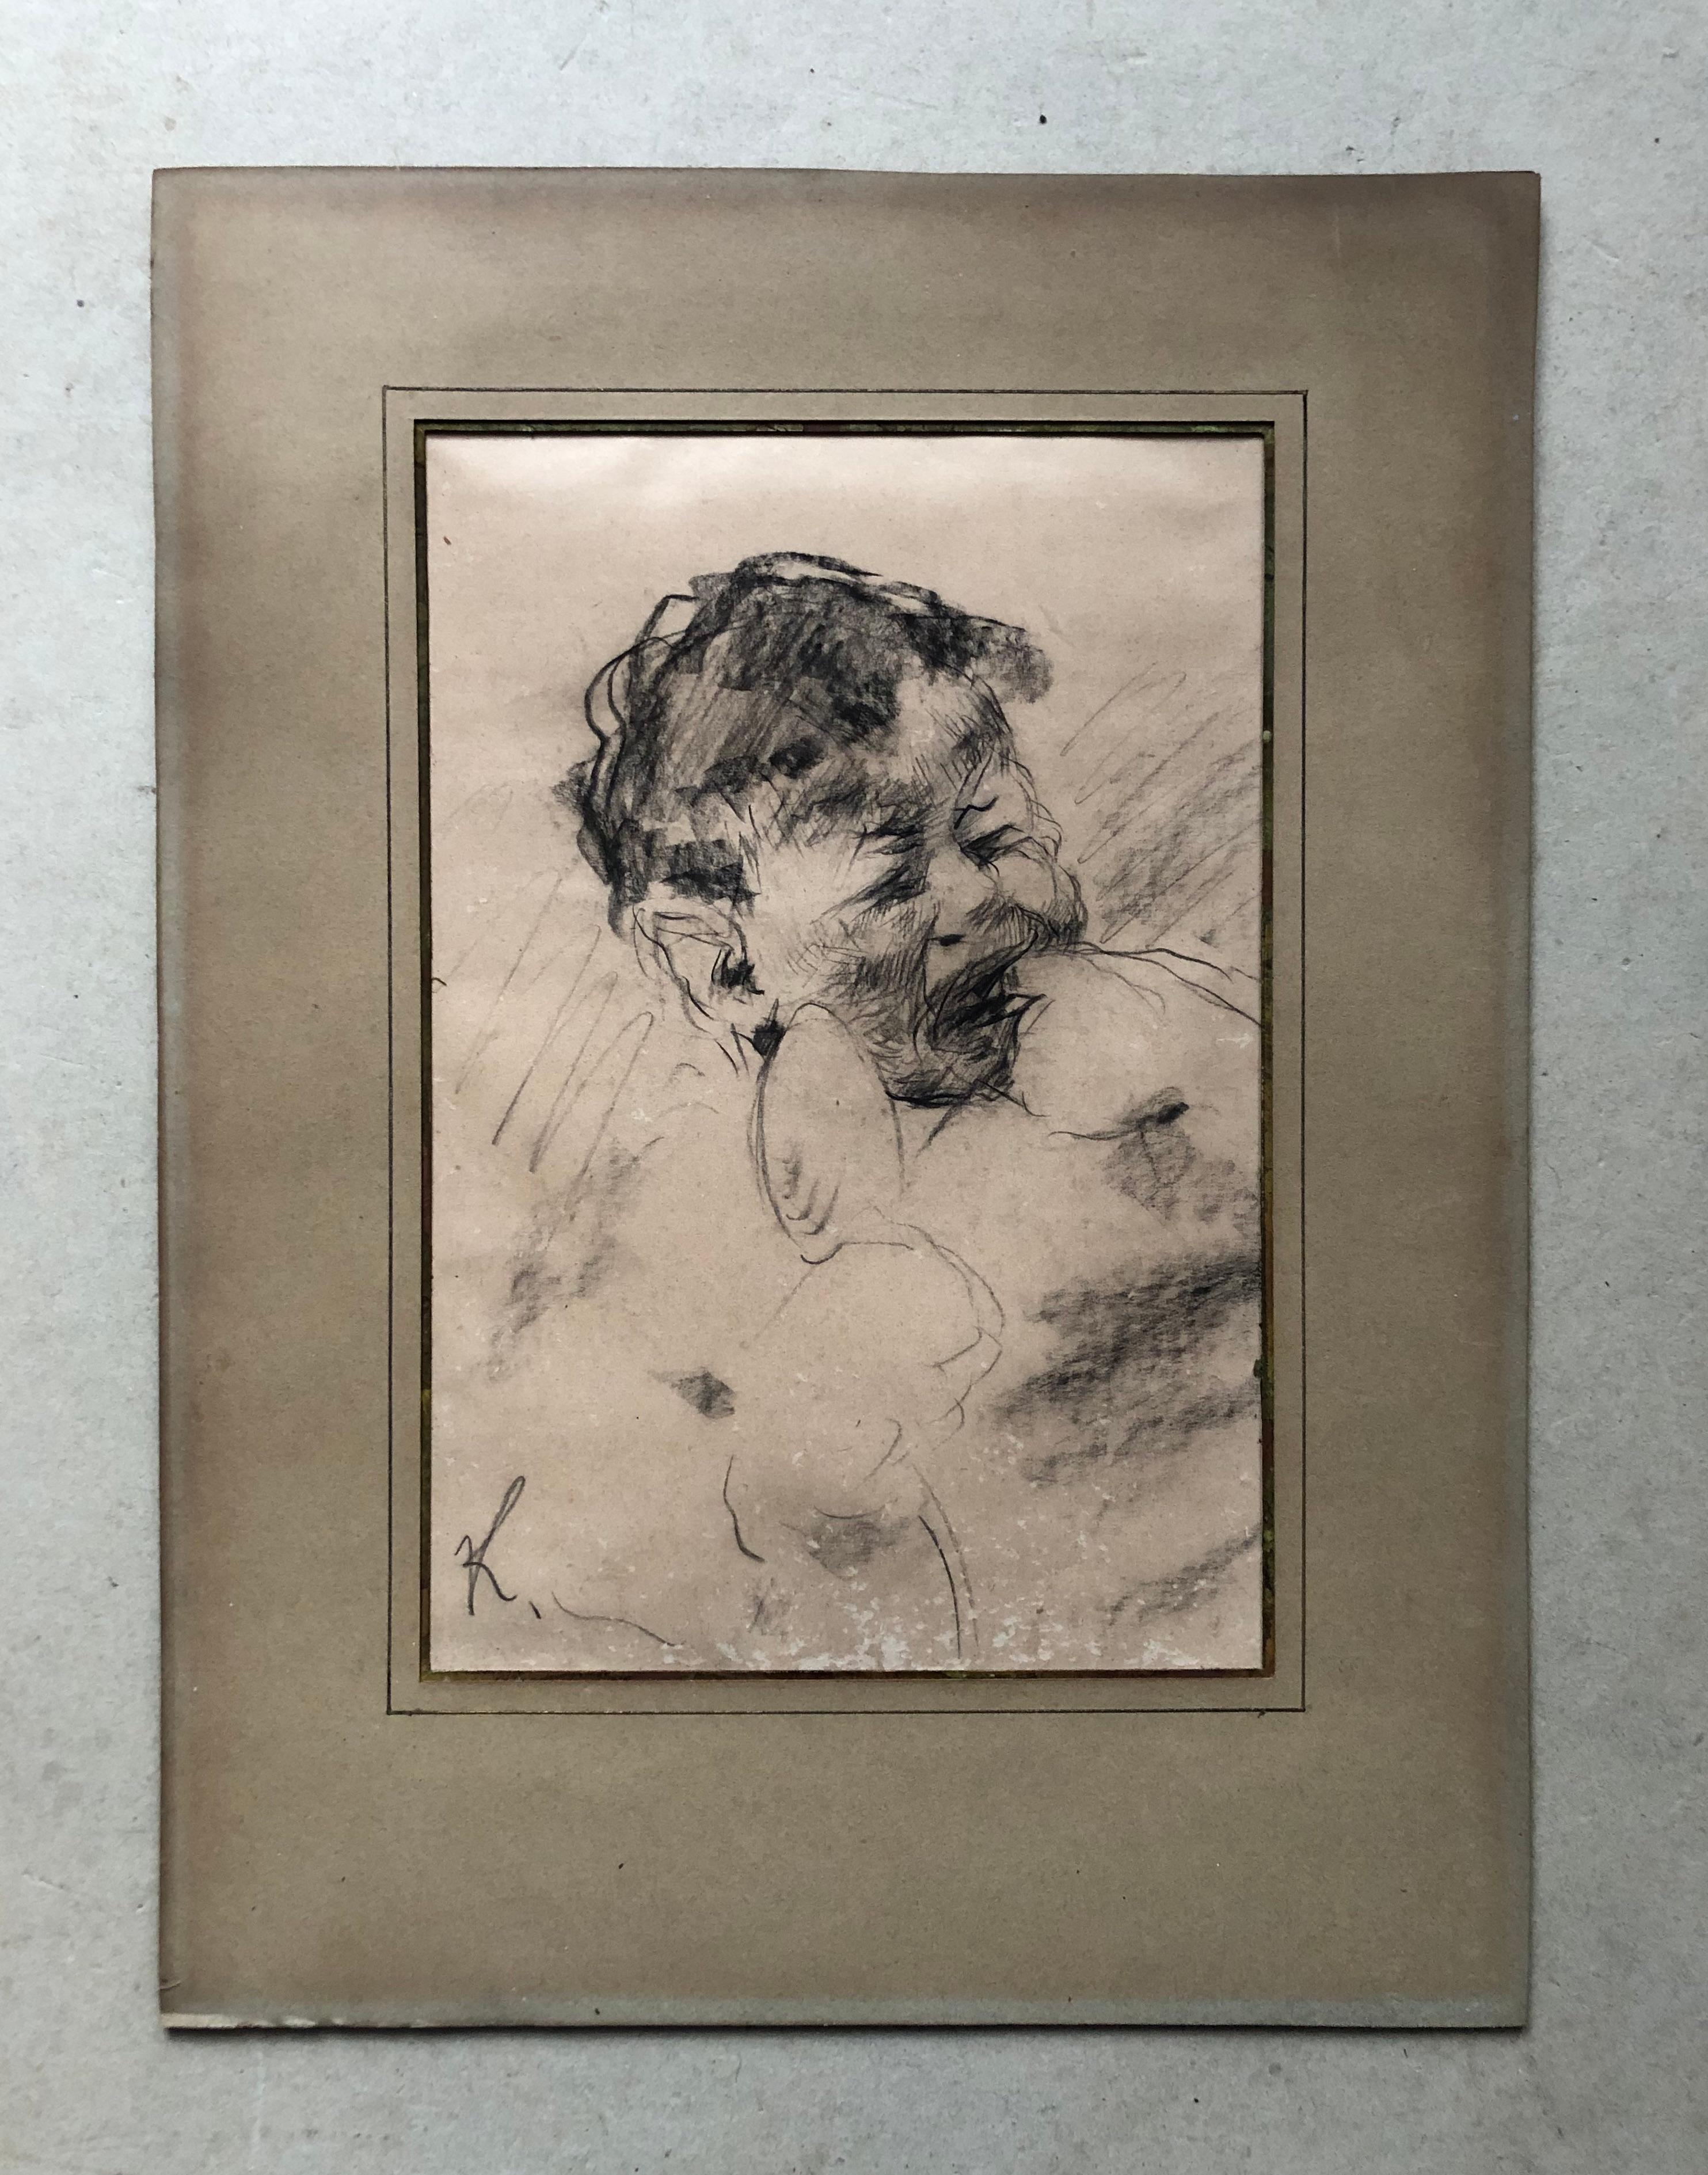 Young Crying Child, Drawing Early 20th Century, Monogram K - Art by Unknown